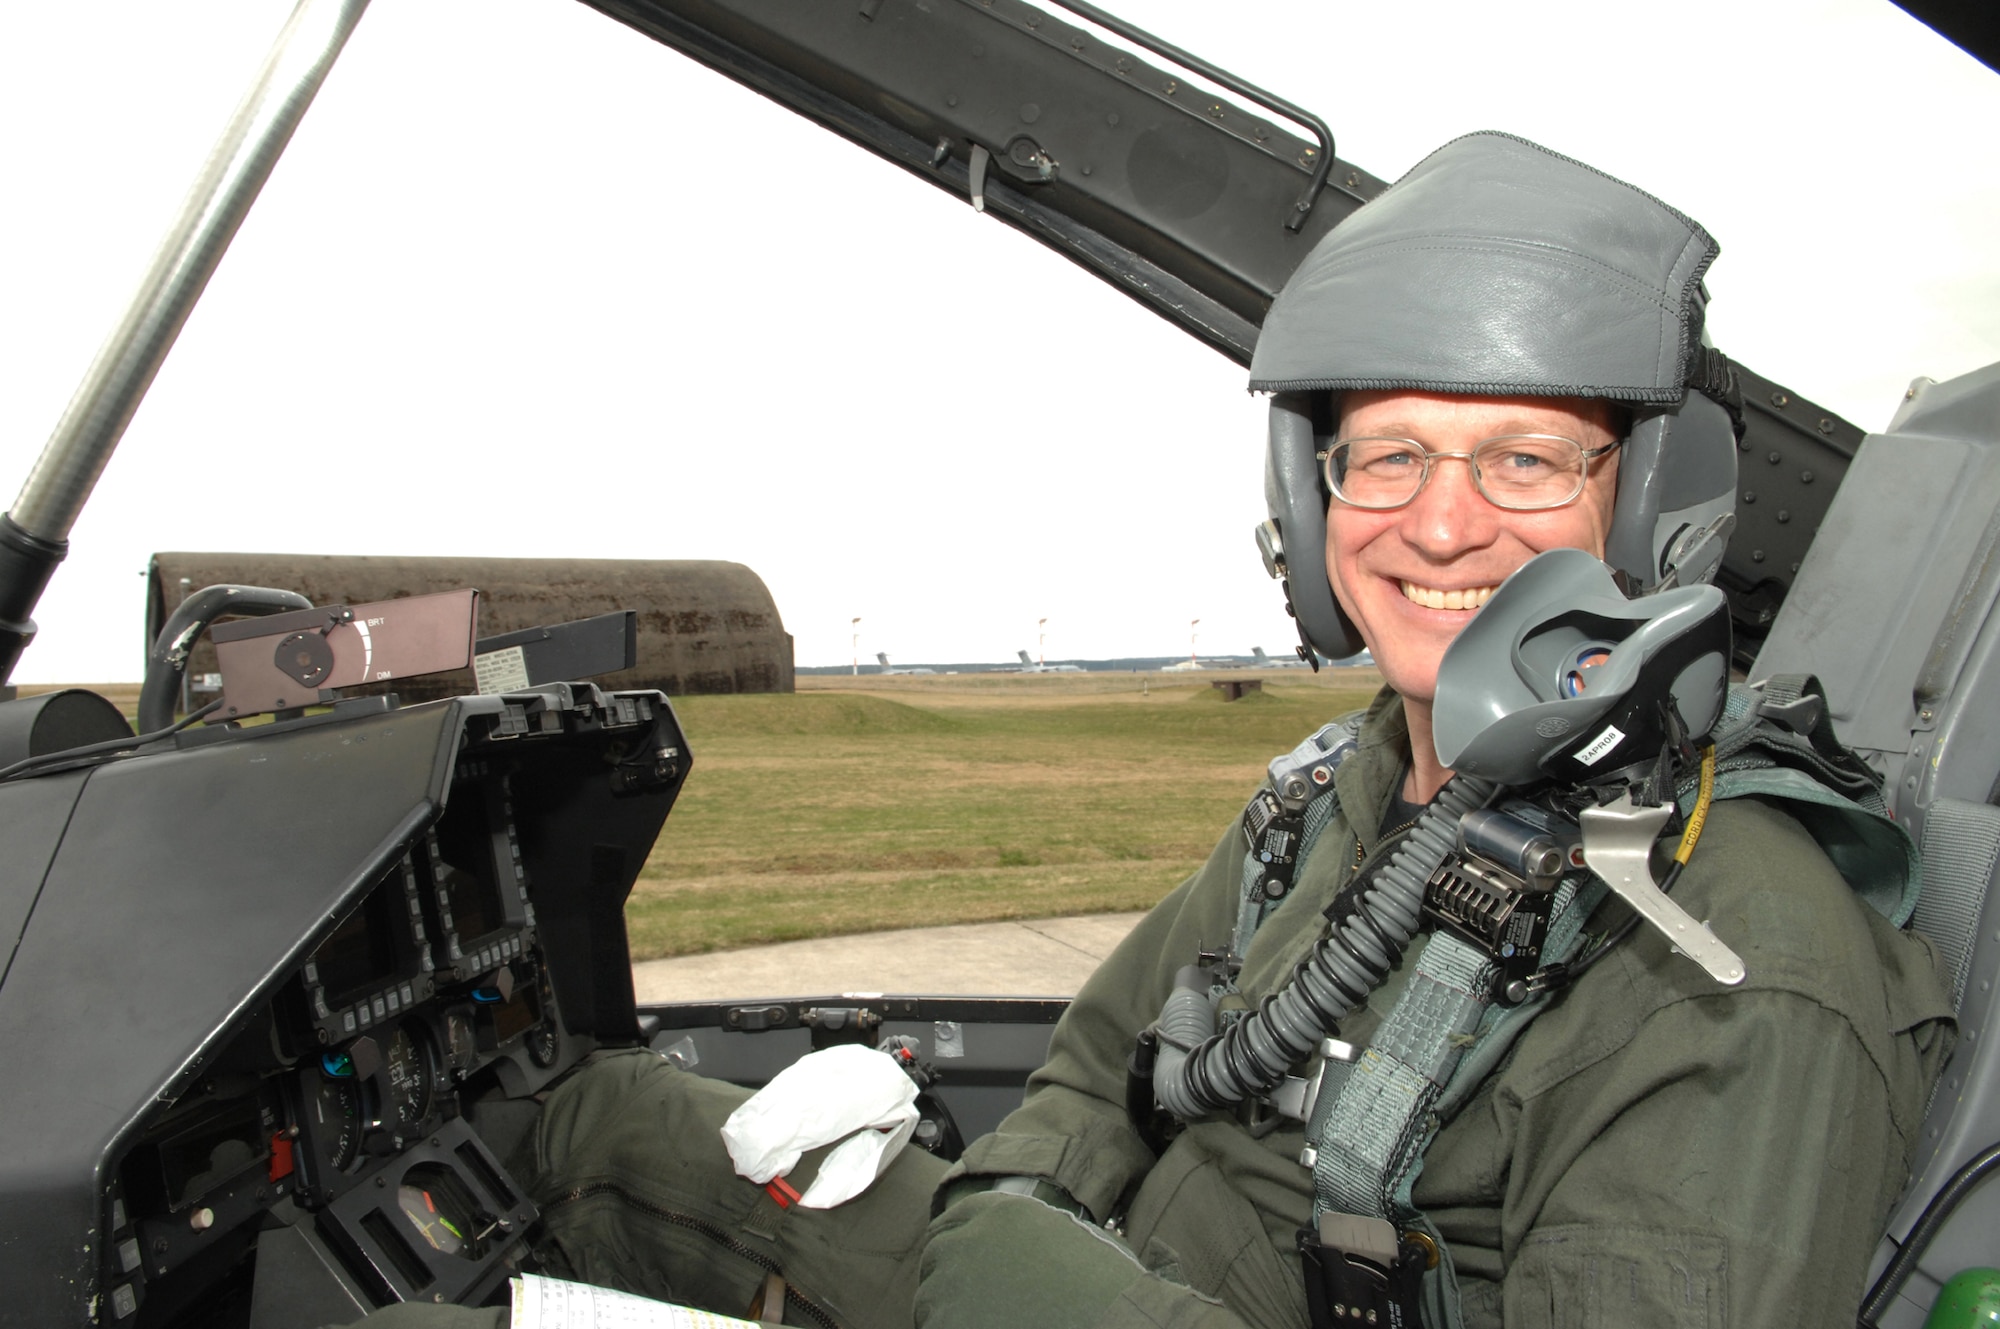 SPANGDAHLEM AIR BASE, Germany -- Chief Master Sgt. Vance Clarke, 52nd Fighter Wing command chief, smiles in the cockpit of an F-16 Viper before receiving an incentive flight. The flight was part of a program to help senior leaders gain a better understanding of the base operations. “It also gave me a chance to get out and see the hard work done by the enlisted troops of the 52nd Operations and Maintenance Groups,” Chief Clarke said. (U.S. Air Force photo/Senior Airman Logan Tuttle)  